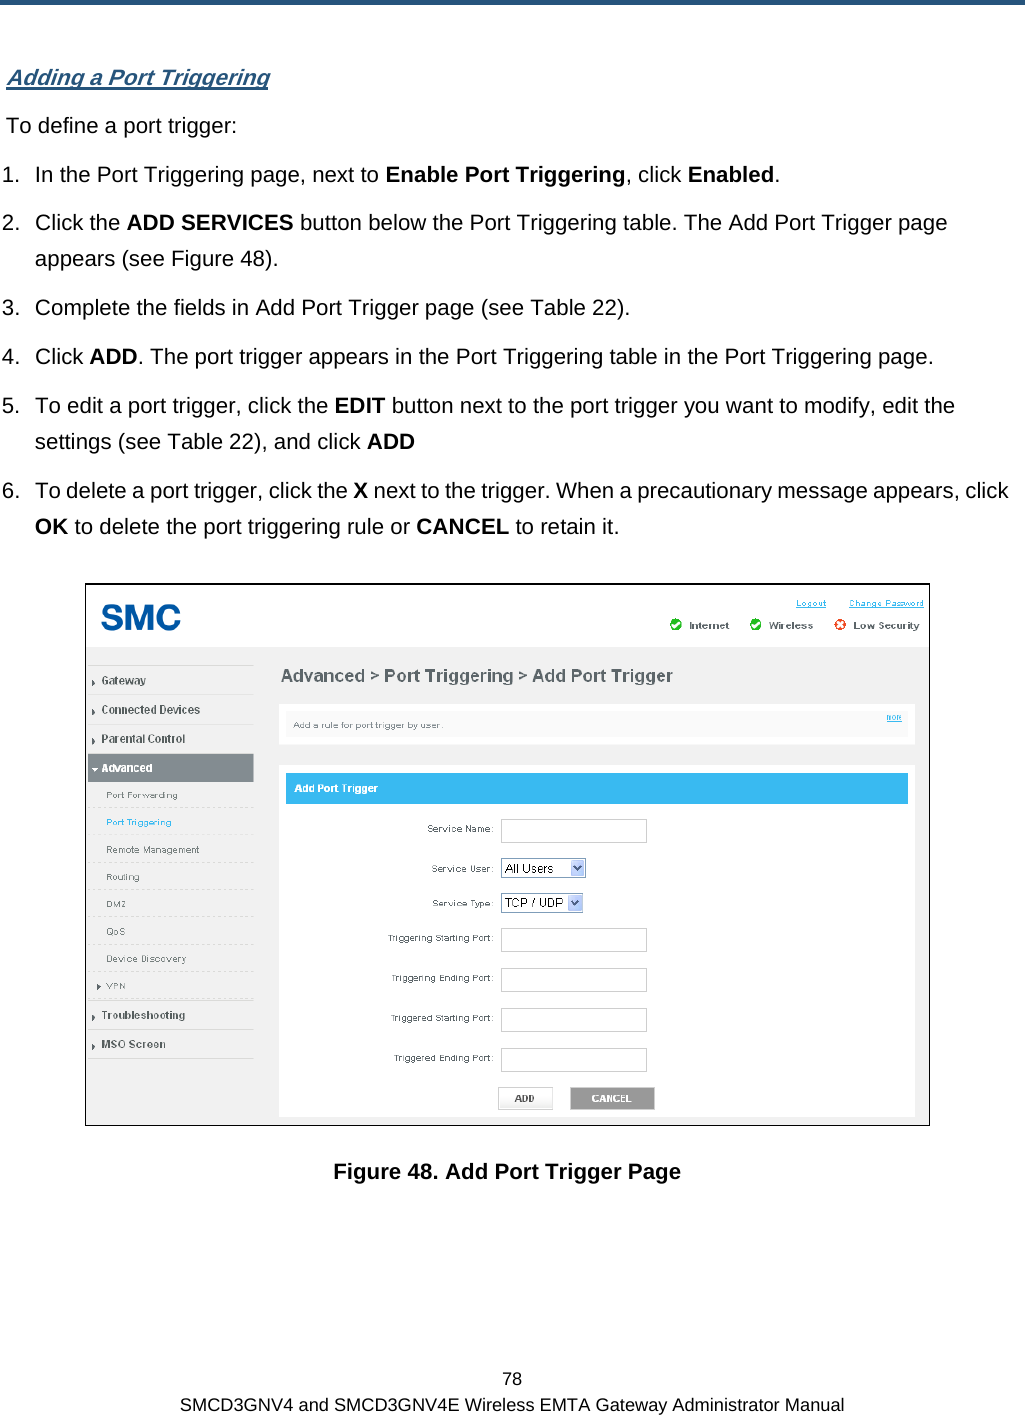  78 SMCD3GNV4 and SMCD3GNV4E Wireless EMTA Gateway Administrator Manual Adding a Port Triggering To define a port trigger: 1.  In the Port Triggering page, next to Enable Port Triggering, click Enabled. 2. Click the ADD SERVICES button below the Port Triggering table. The Add Port Trigger page appears (see Figure 48). 3.  Complete the fields in Add Port Trigger page (see Table 22). 4. Click ADD. The port trigger appears in the Port Triggering table in the Port Triggering page. 5.  To edit a port trigger, click the EDIT button next to the port trigger you want to modify, edit the settings (see Table 22), and click ADD 6.  To delete a port trigger, click the X next to the trigger. When a precautionary message appears, click OK to delete the port triggering rule or CANCEL to retain it.  Figure 48. Add Port Trigger Page 